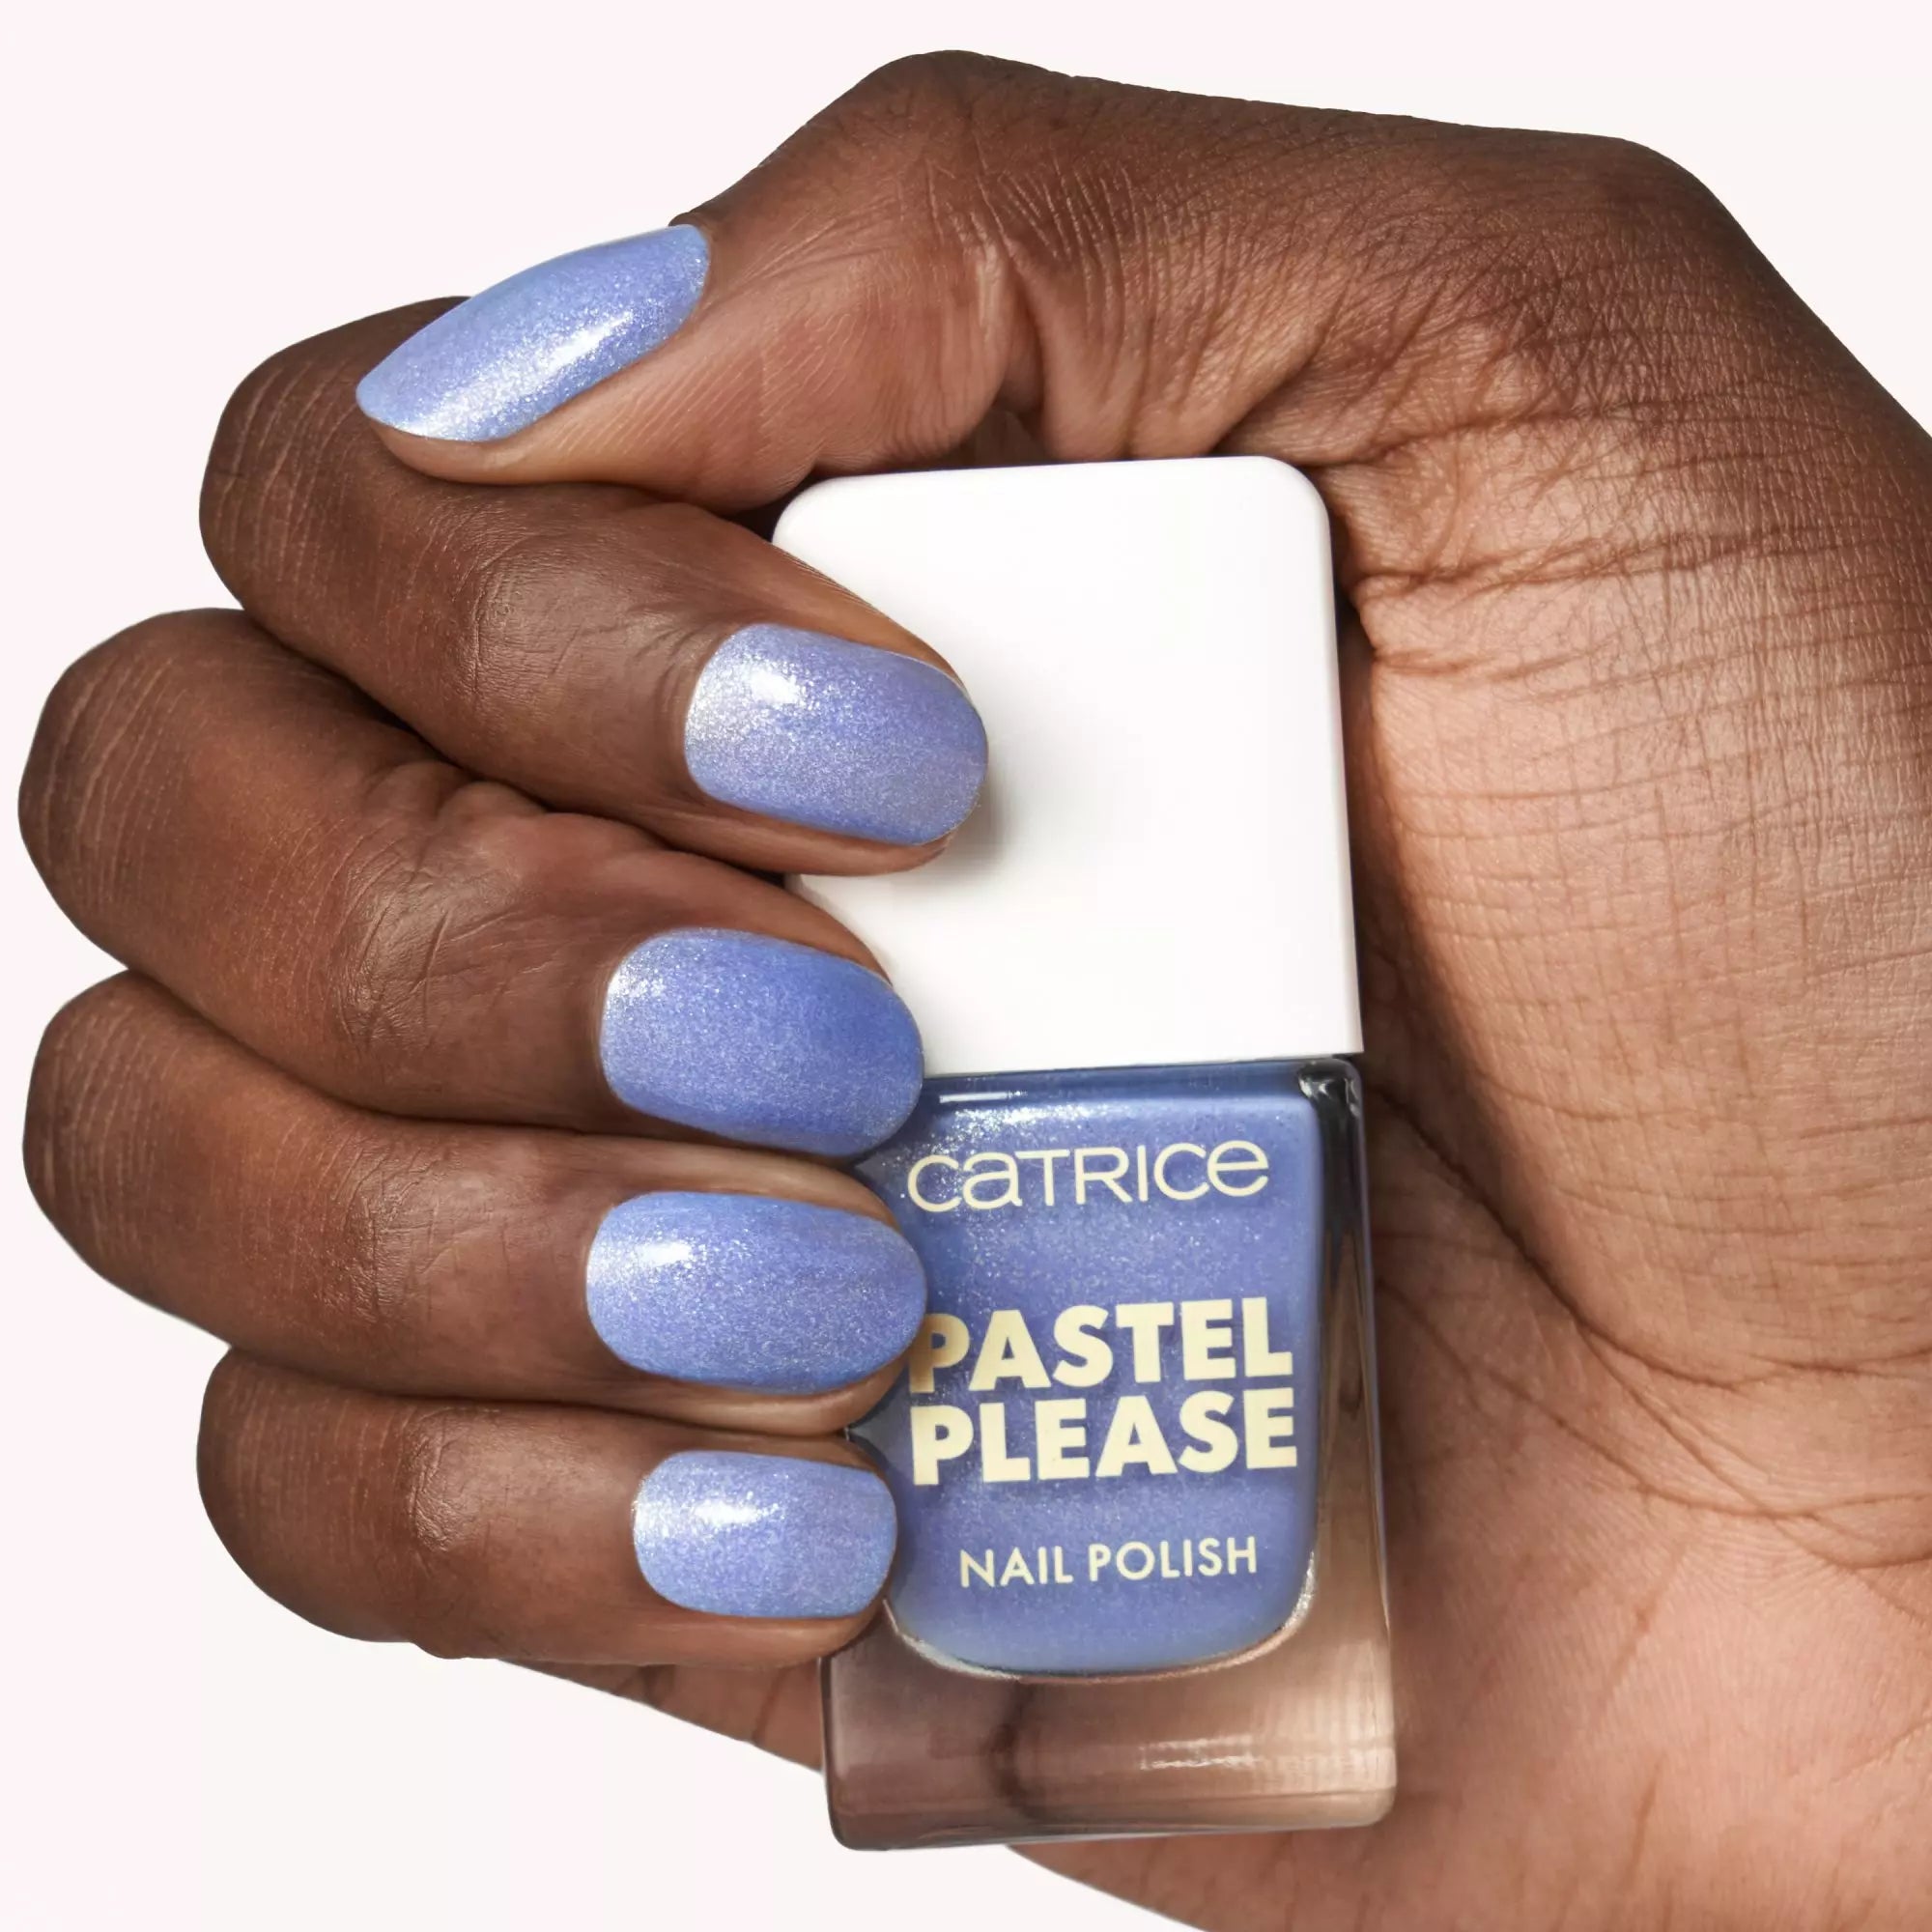 Catrice Pastel Please Nail Polish In 020 Cloud Nine Lilac Blue